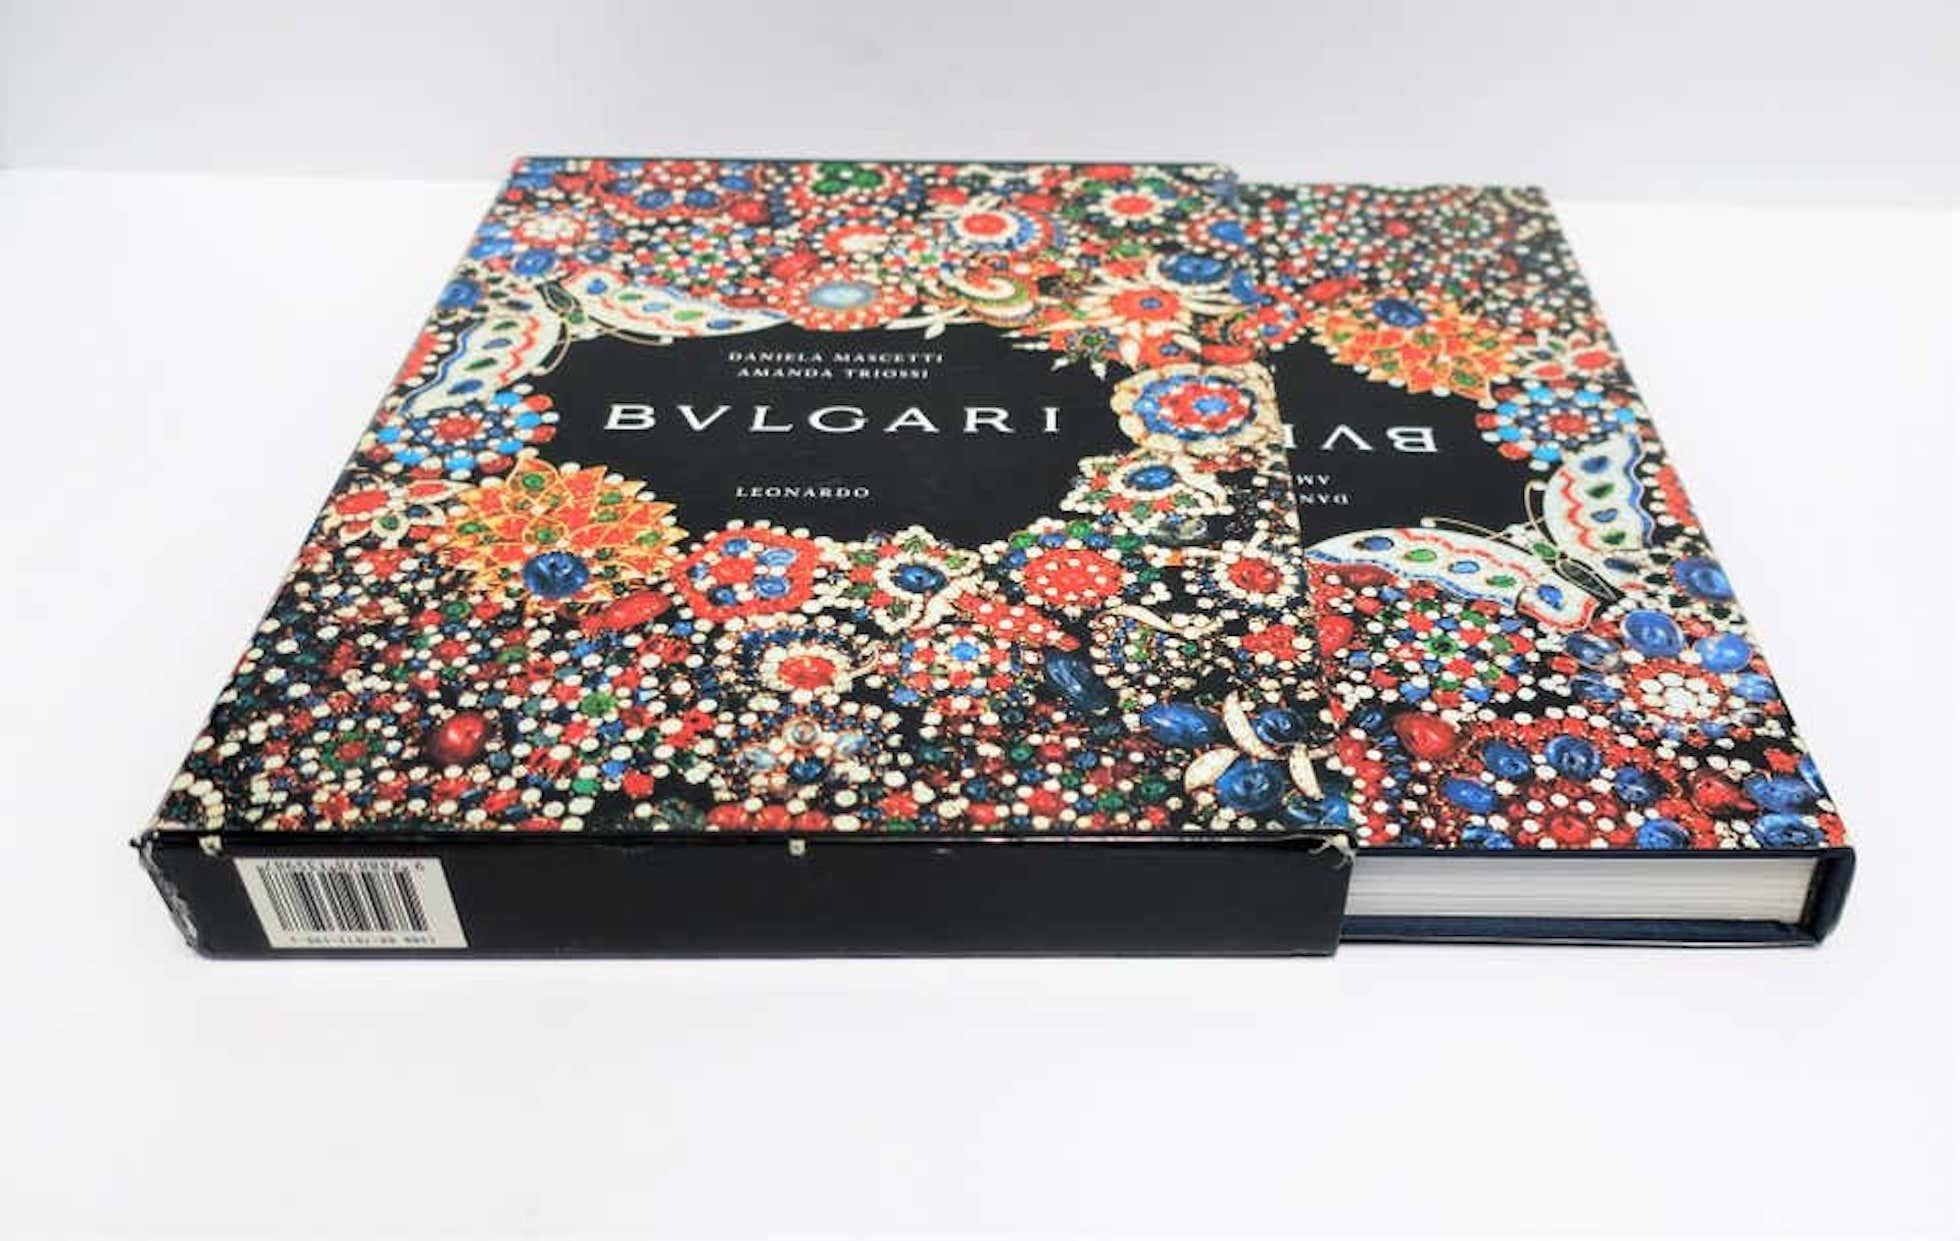 This is a beautiful coffee table or library book about the history of the iconic Italian luxury jeweler Bvlgari (or Bulgari), circa 1990s, Italy.
Book covers Bulgari's history in creating iconic gorgeous jewelry and its connection, globally, to